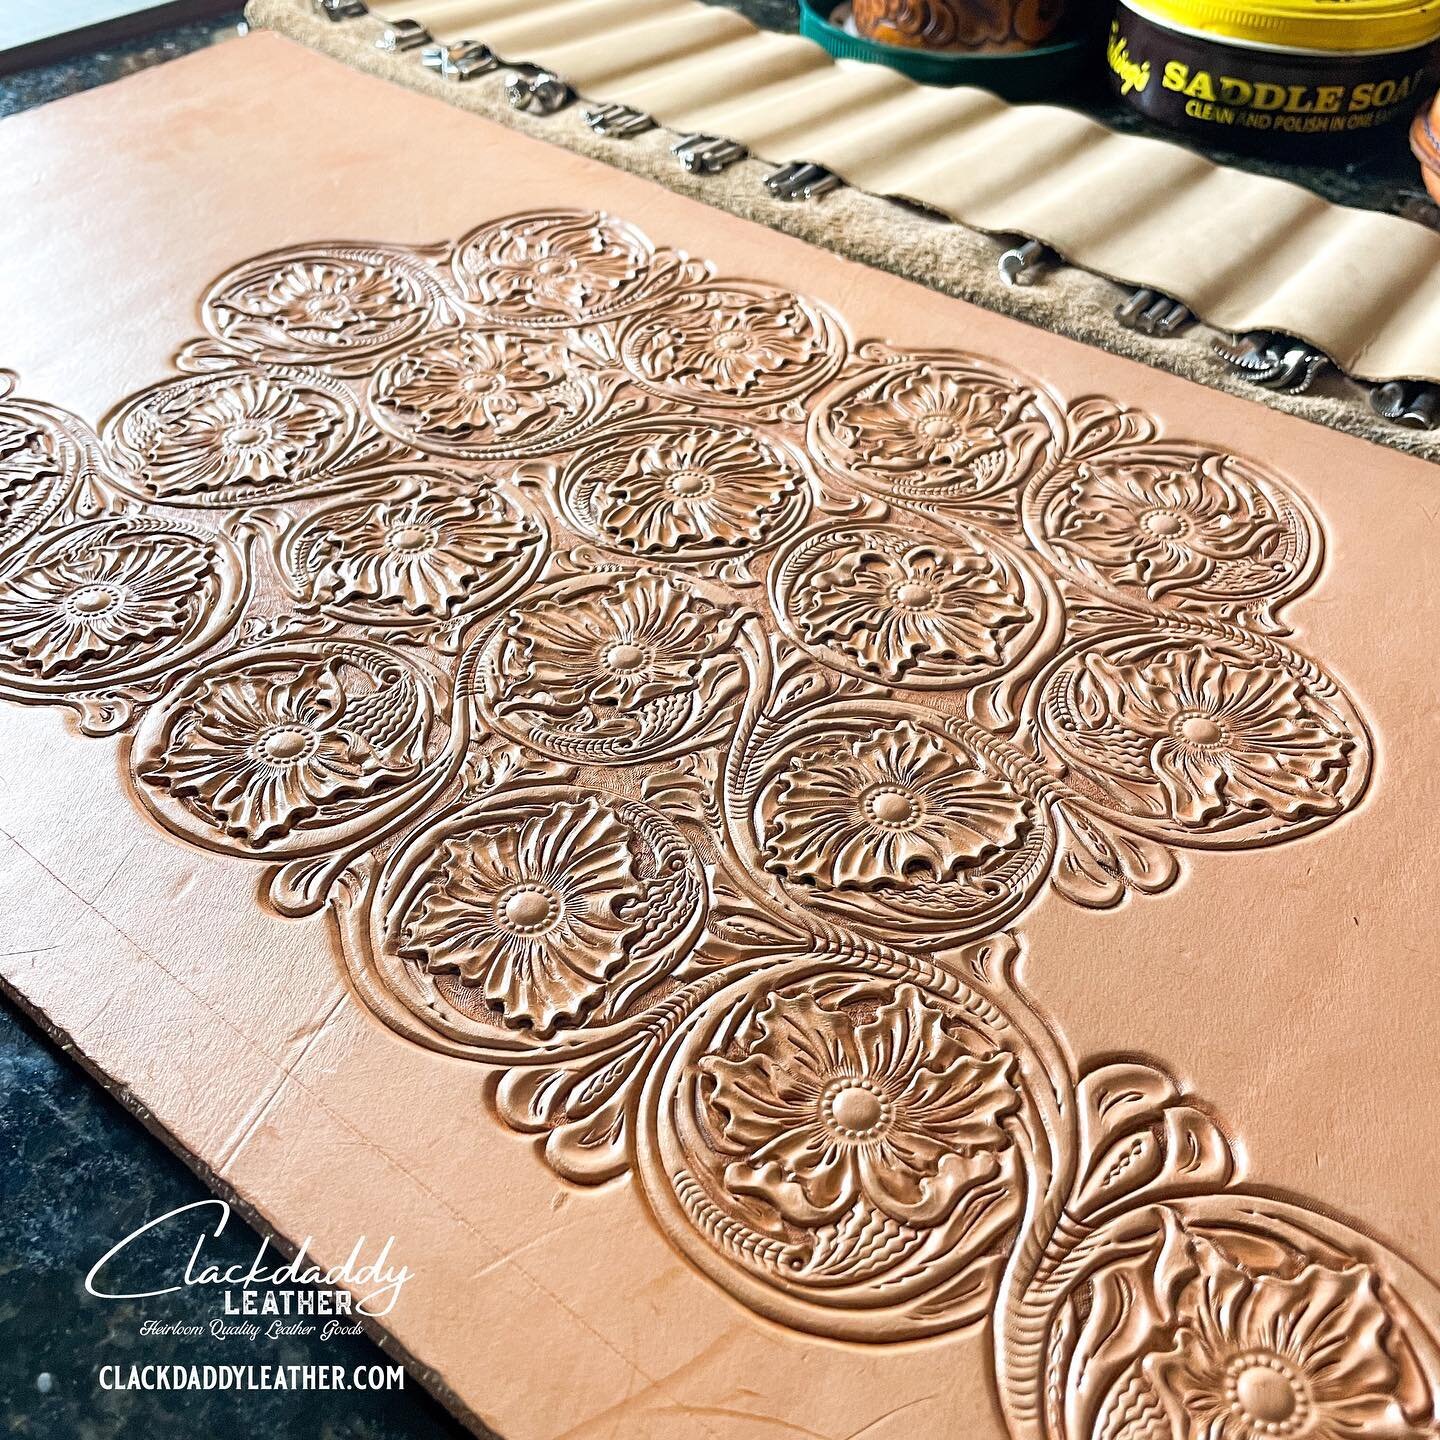 Side one is done🙌 This may be the most challenging carving I&rsquo;ve done to date, and I&rsquo;ve still got another one to do yet. Think I may knock out a few of the smaller pieces this week before I tackle the next one. #leathercarving #leatherart